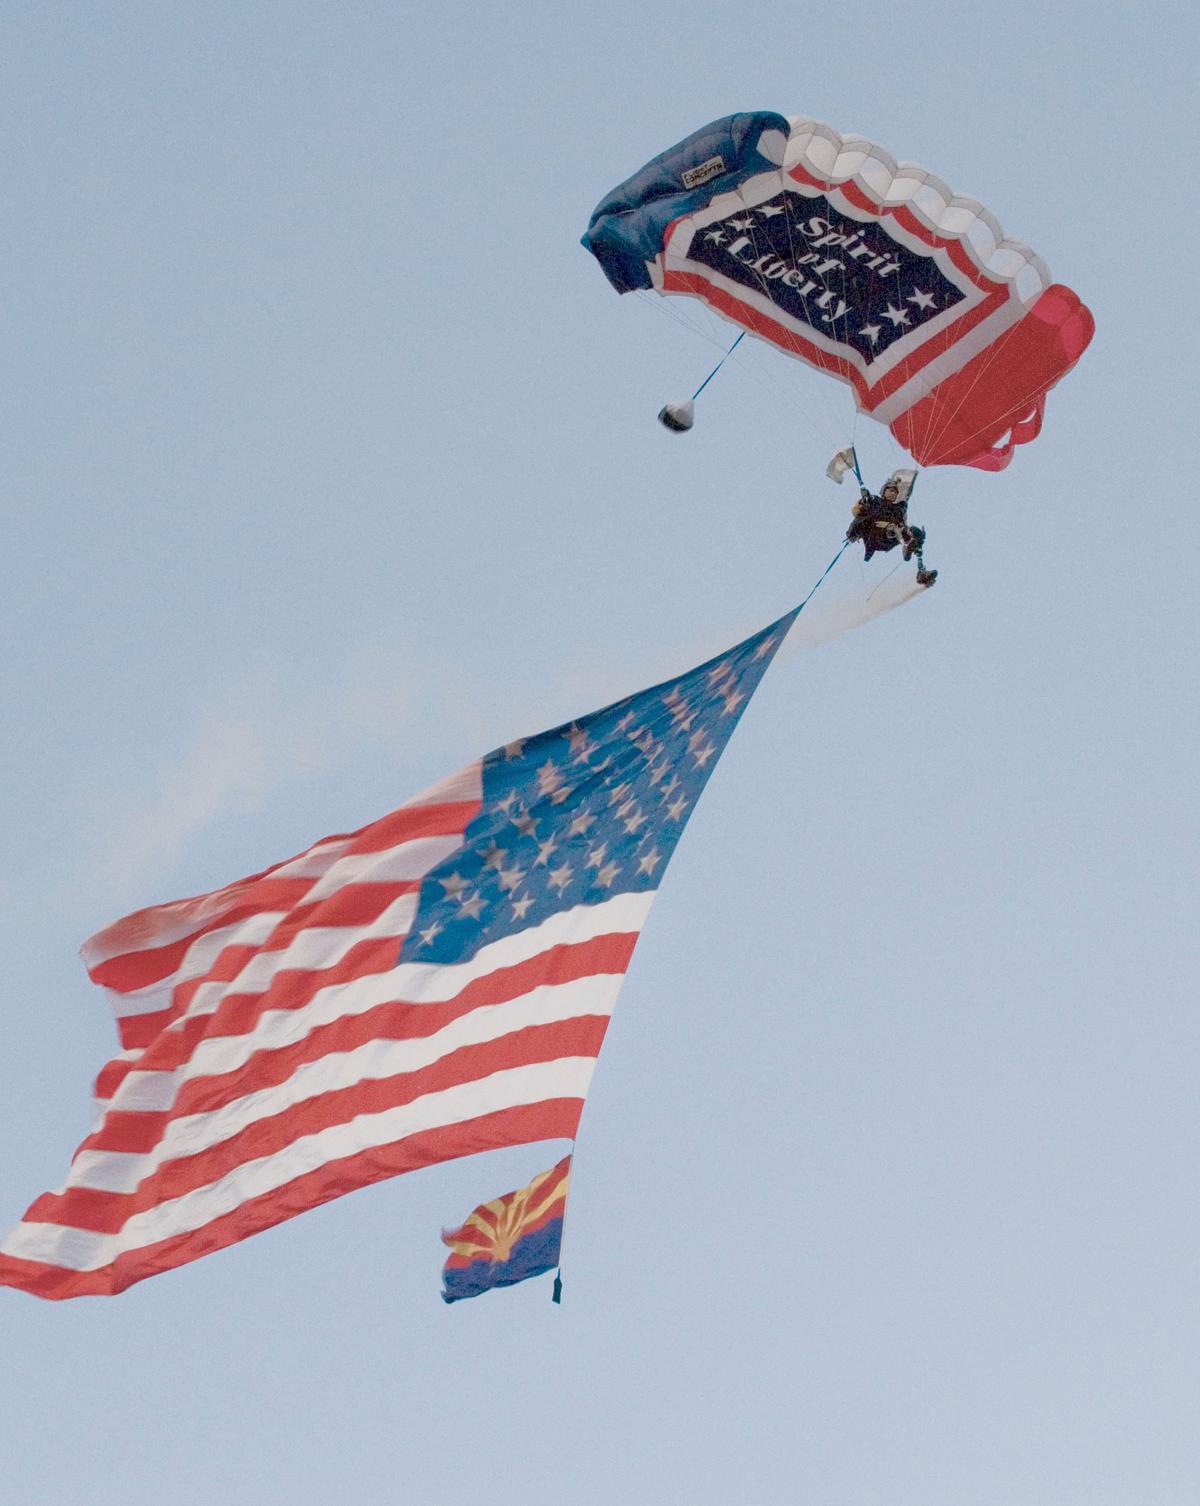 Bowman parachutes from a helicopter while waving a giant American flag during the Fourth of July Freedom Fest at the Fairmont Scottsdale Princess Resort on July 3. (<a href="https://www.dvidshub.net/image/620138/tears-freedom">Spc. Danielle Gregory</a>)